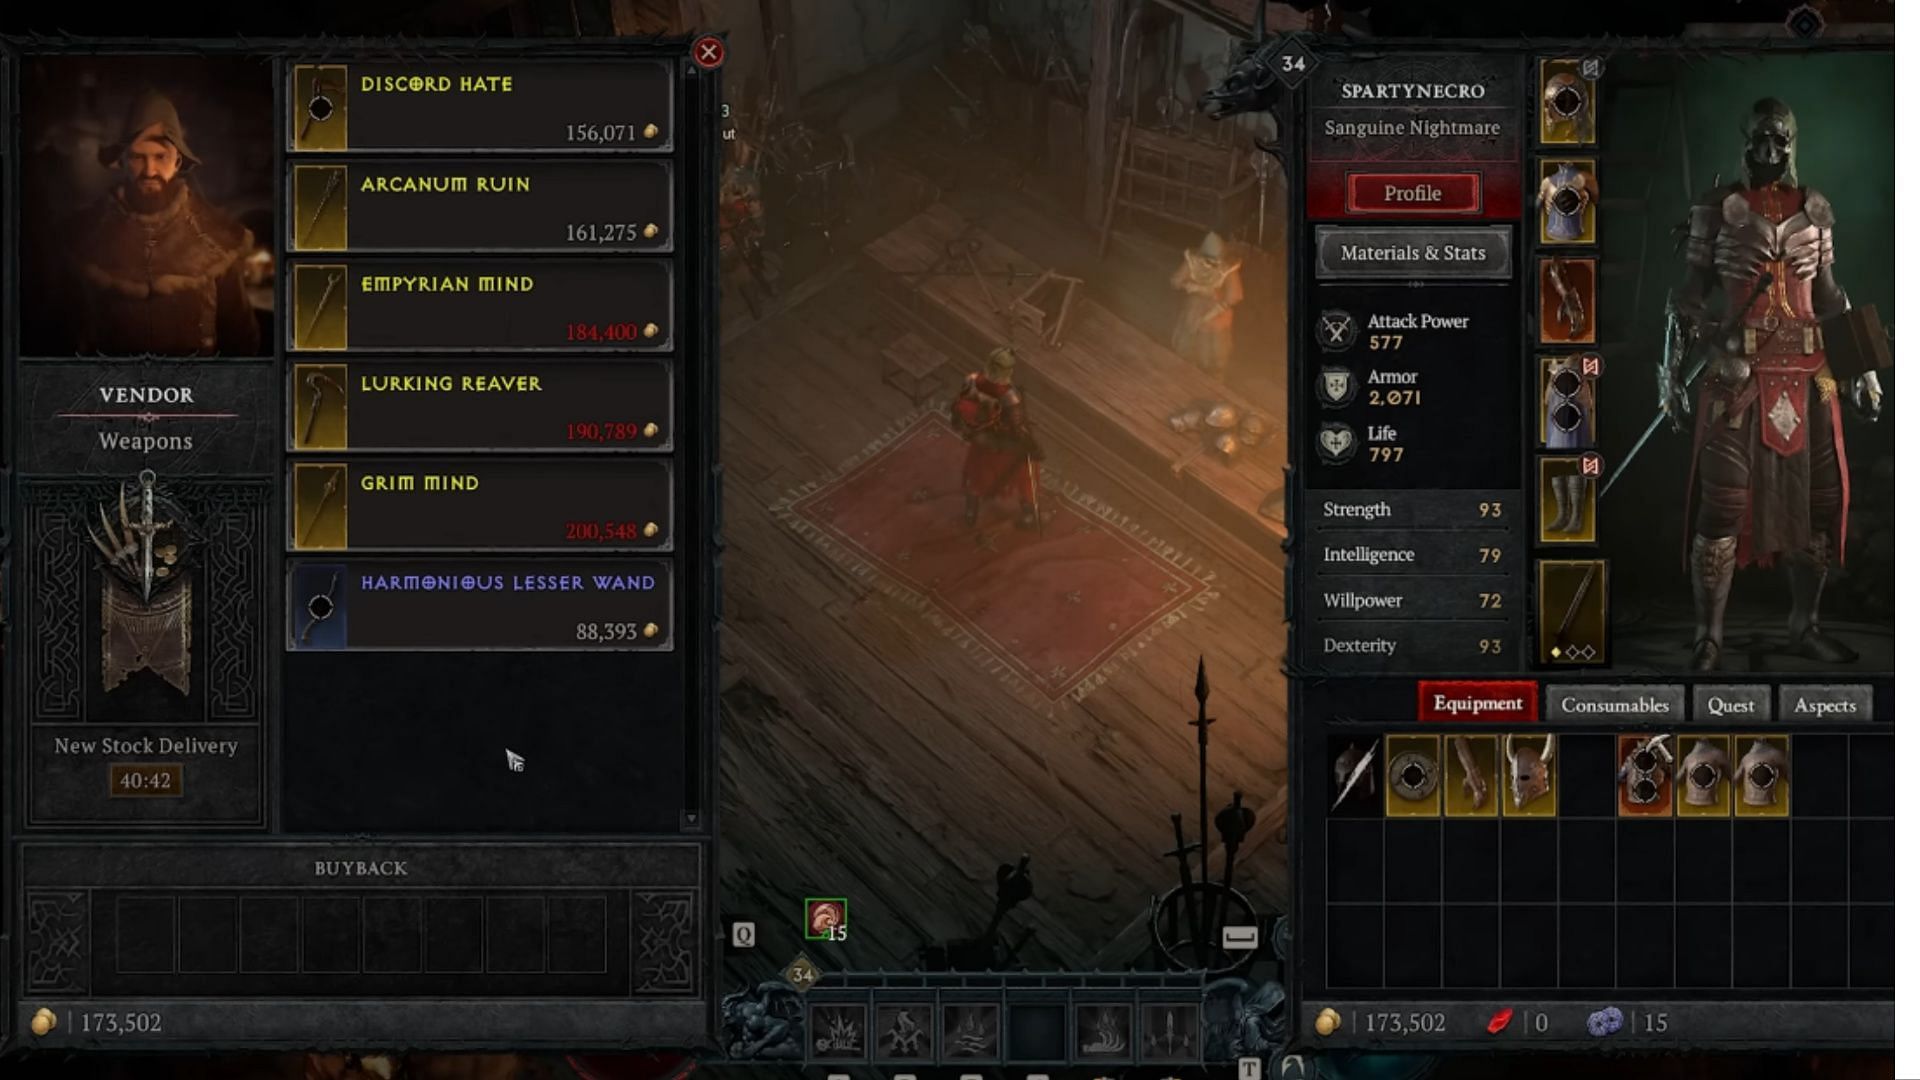 Obtaining gold in Diablo 4 is possible through random means, but it